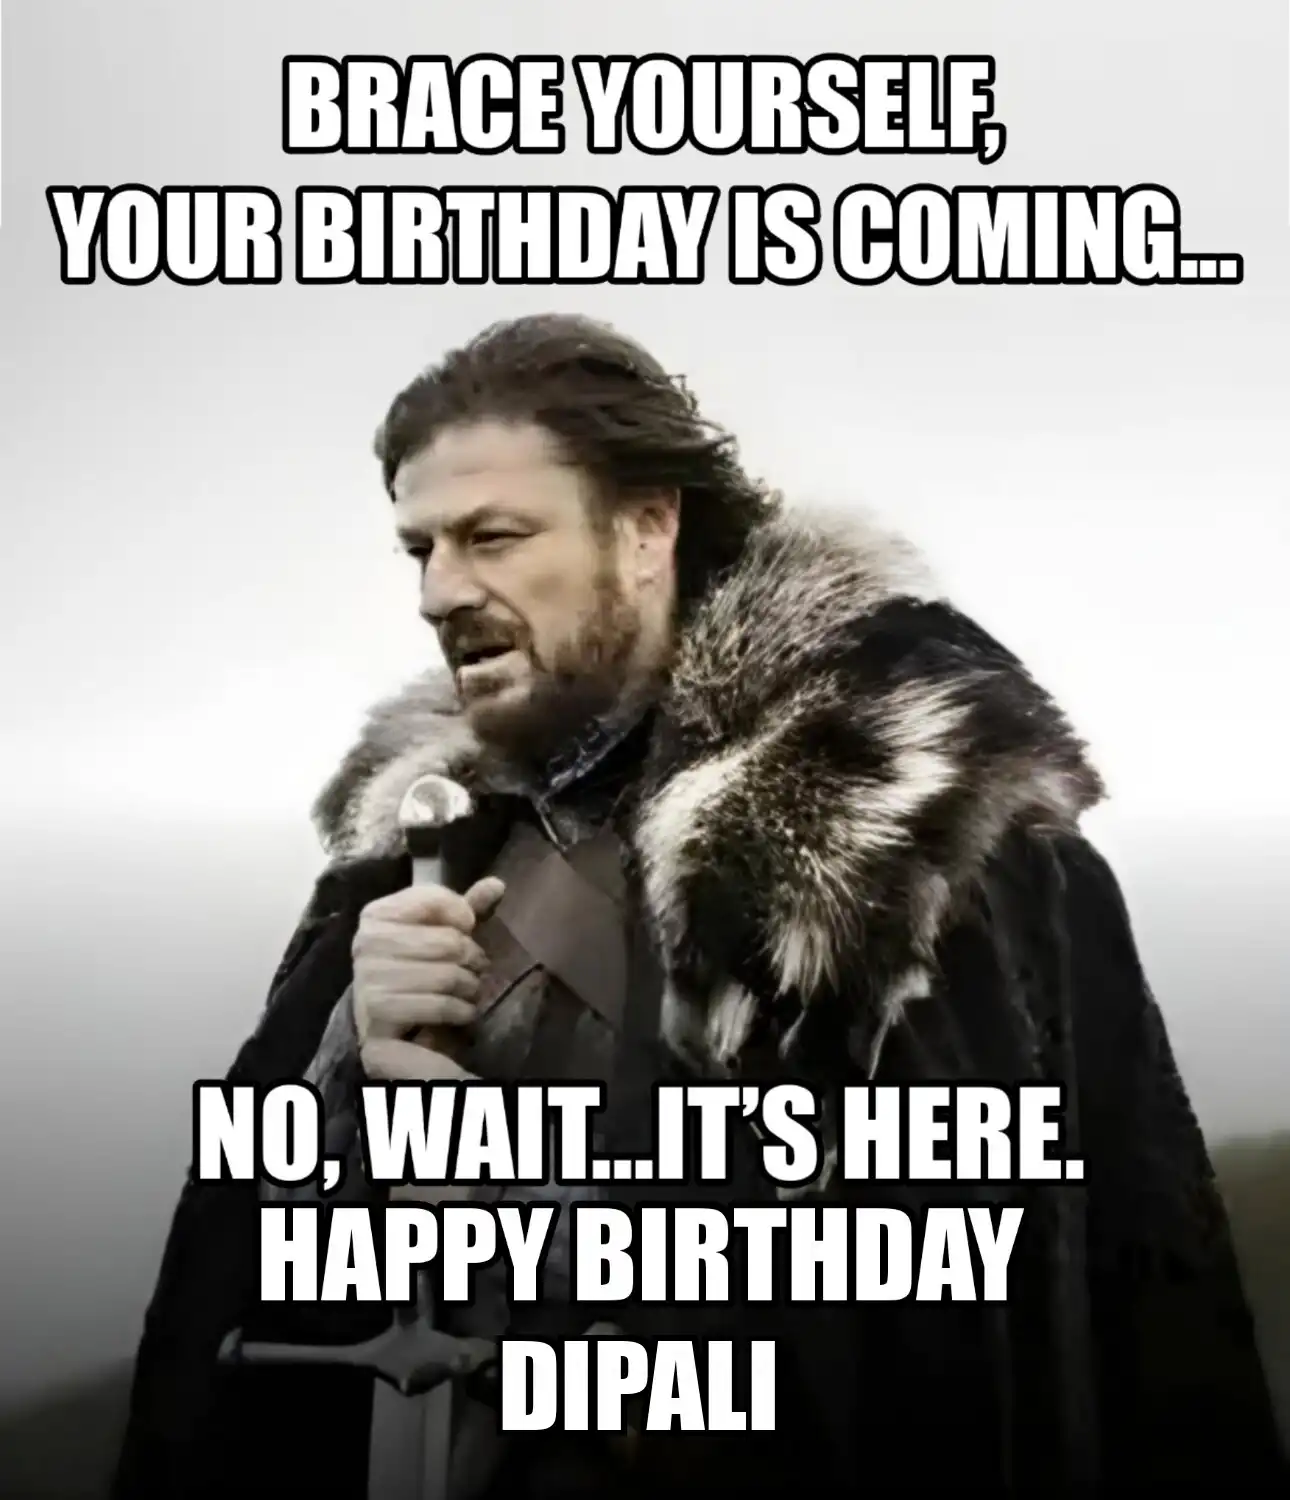 Happy Birthday Dipali Brace Yourself Your Birthday Is Coming Meme